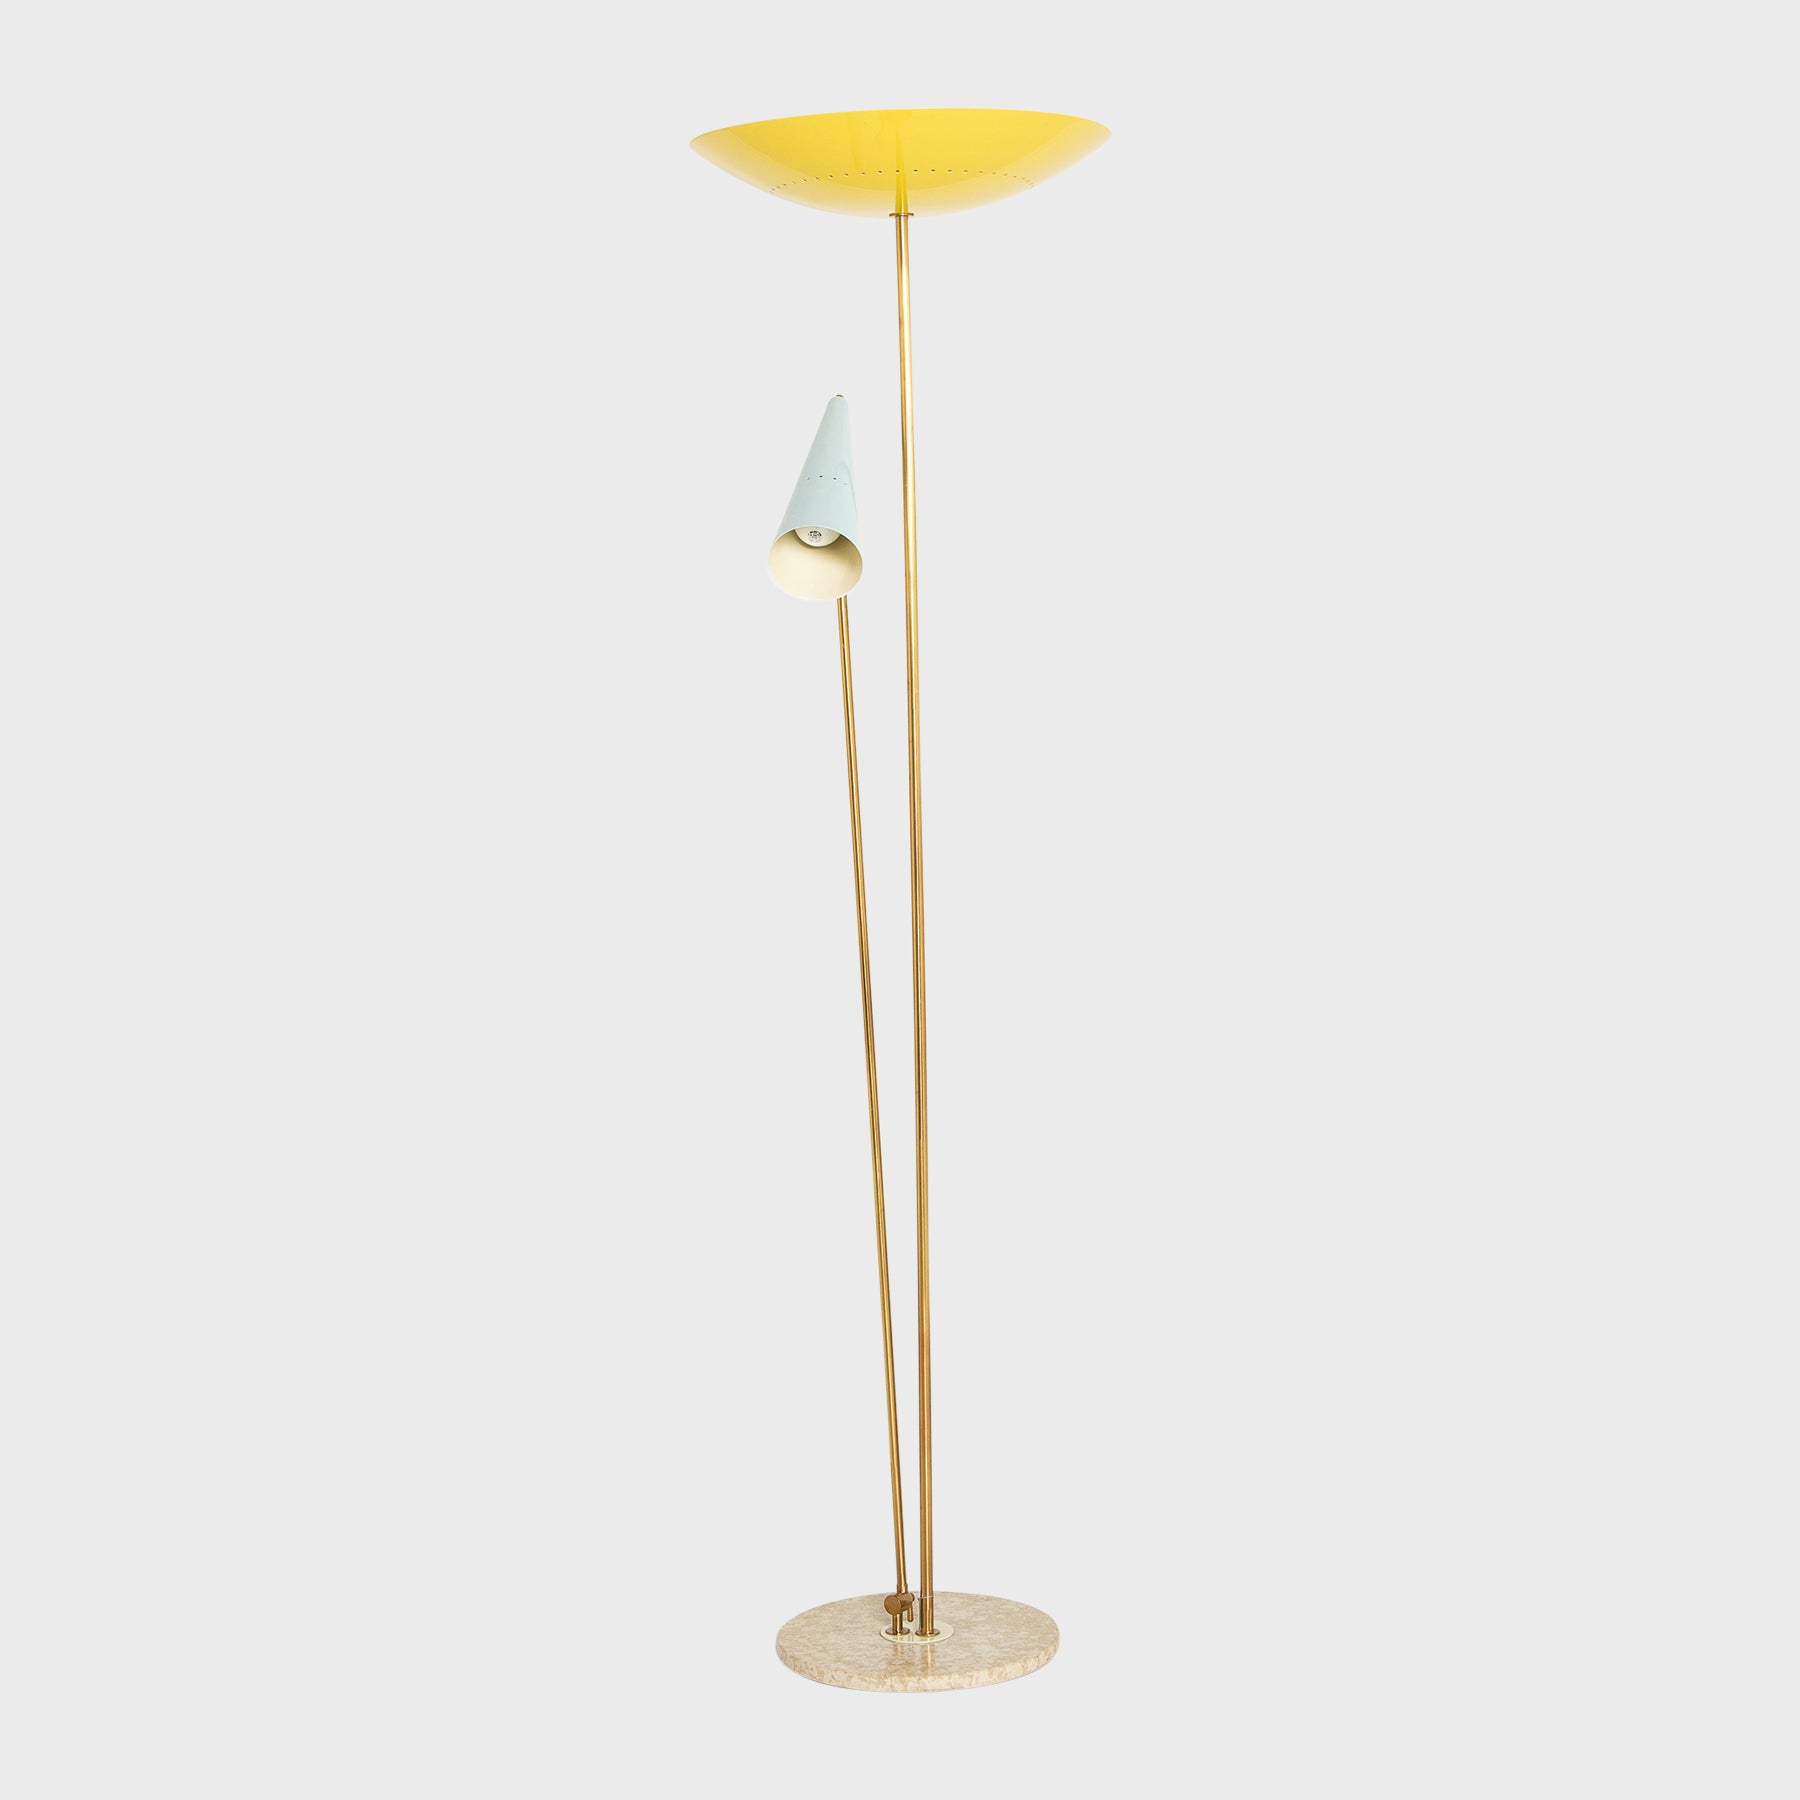 MAXFIELD PRIVATE COLLECTION | TWO SHADE FLOOR LAMP